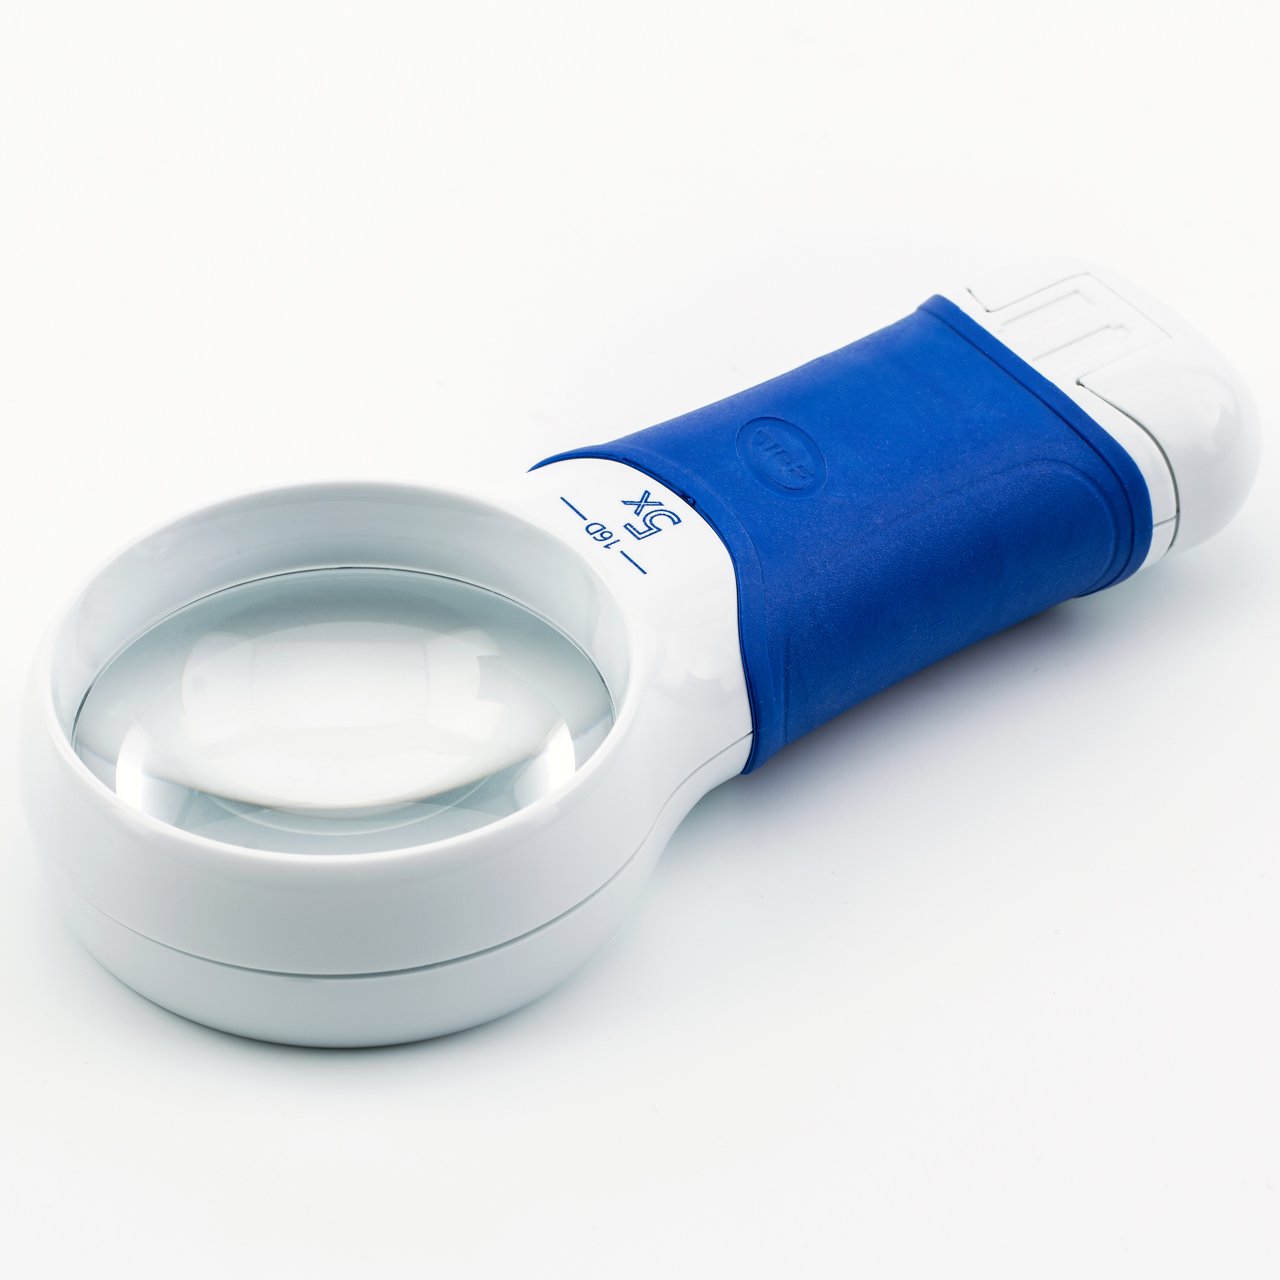 Coil Atmax LED Illuminated Hand-held Magnifier